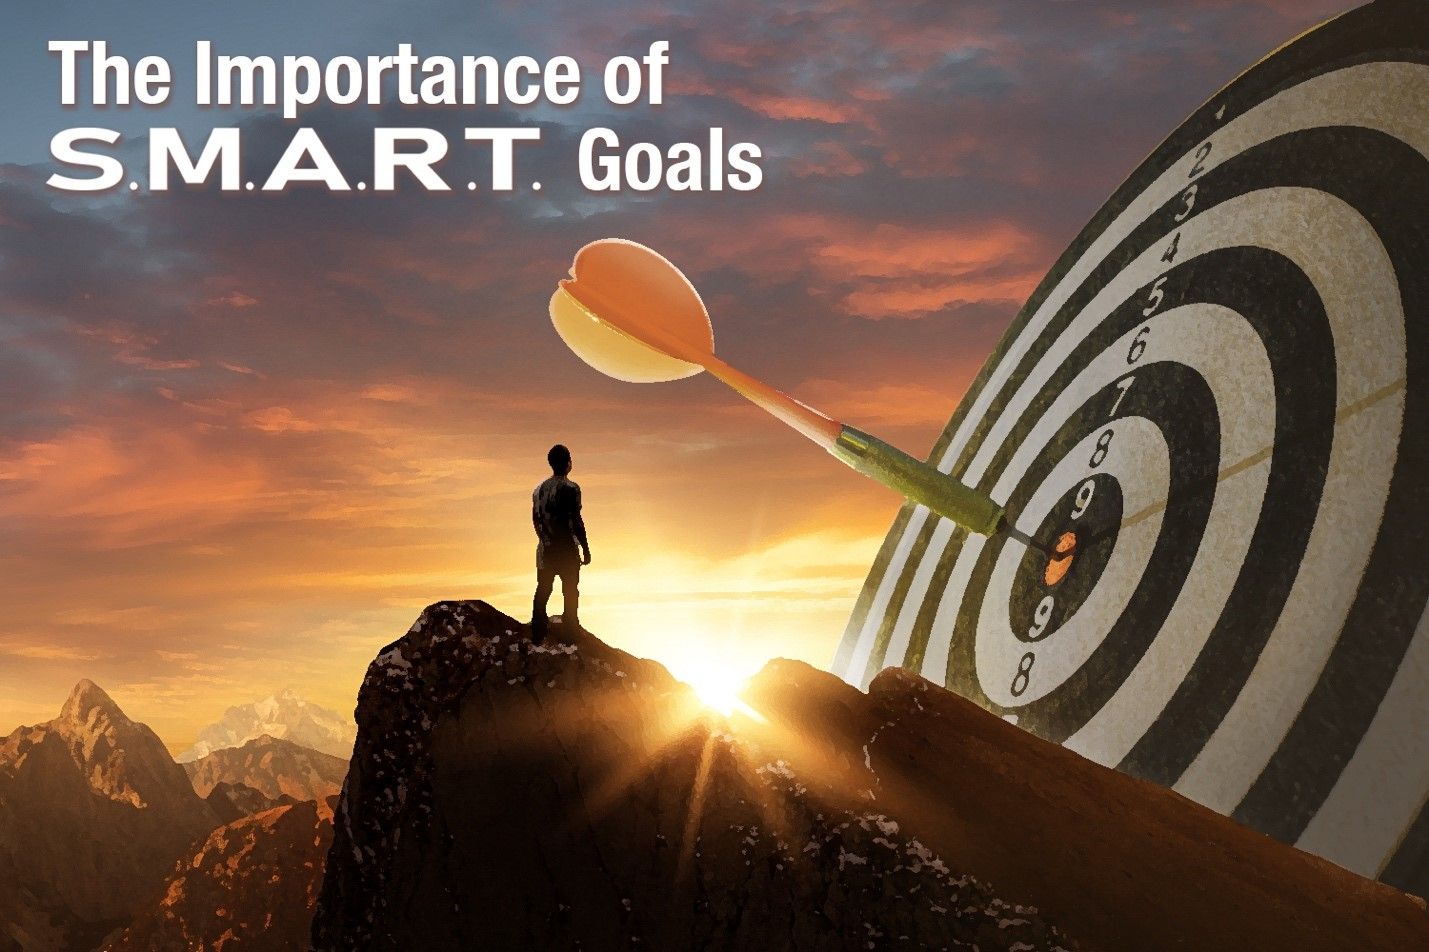 The Importance of S.M.A.R.T. Goals